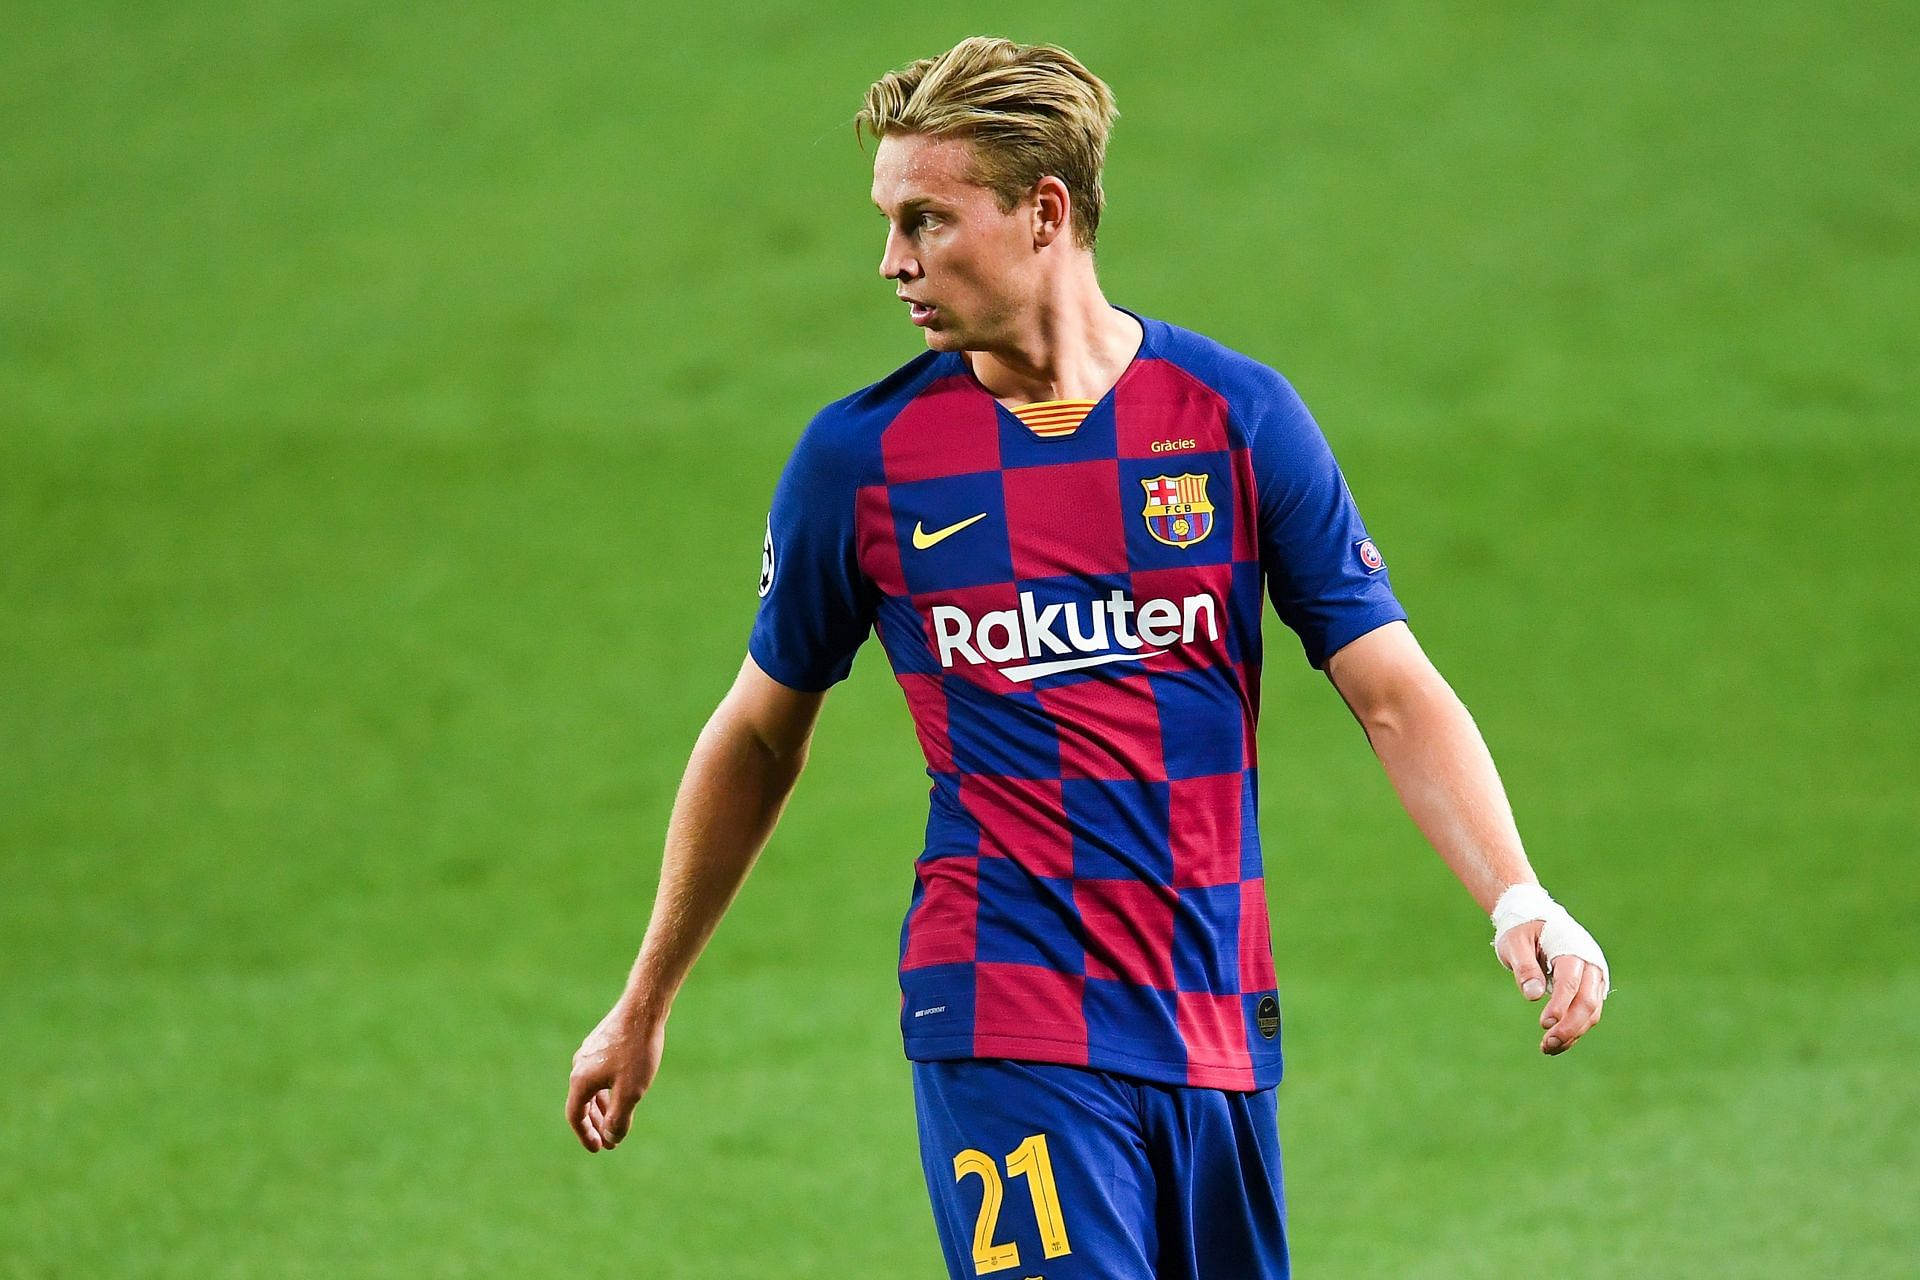 Thanks to Ronald Koeman, Frenkie de Jong has improved his offensive output at Barcelona